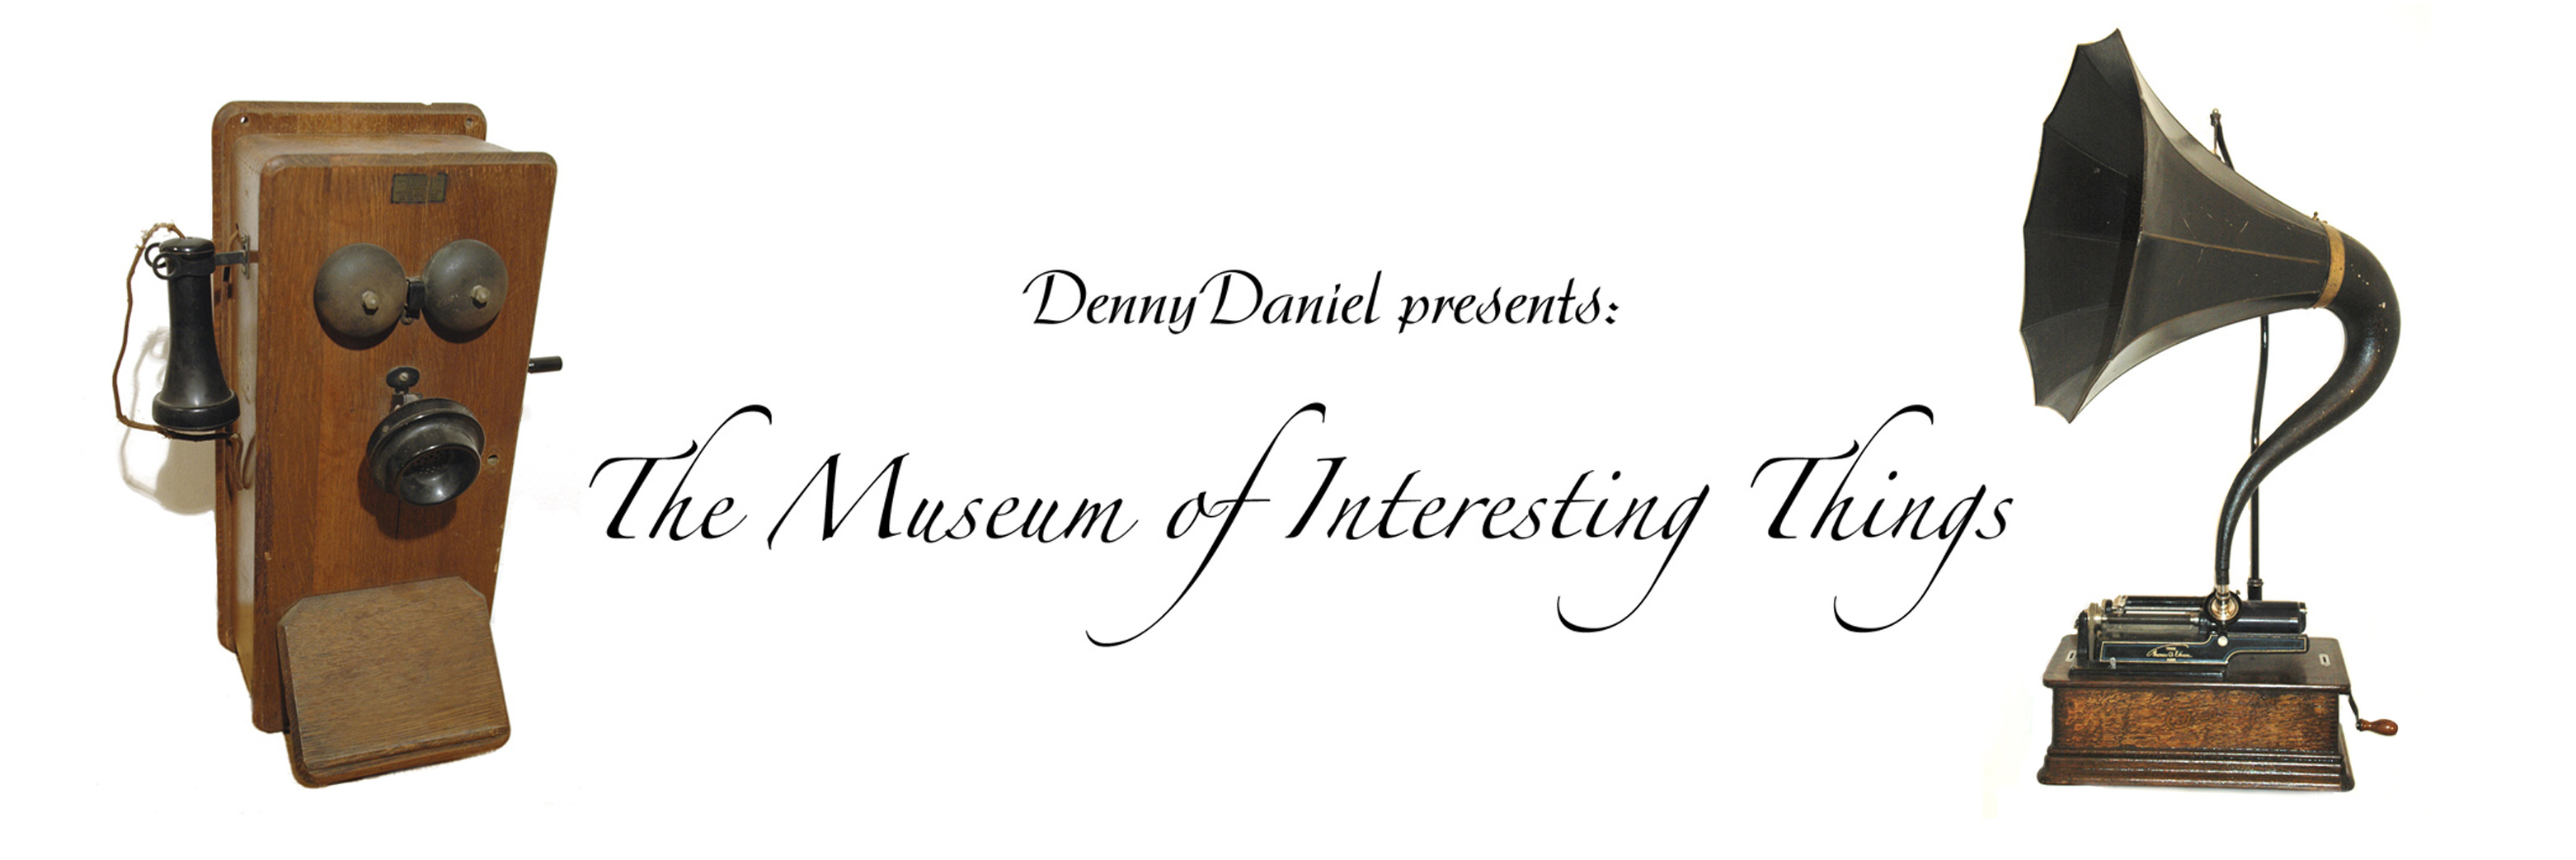 The Museum of Interesting Things